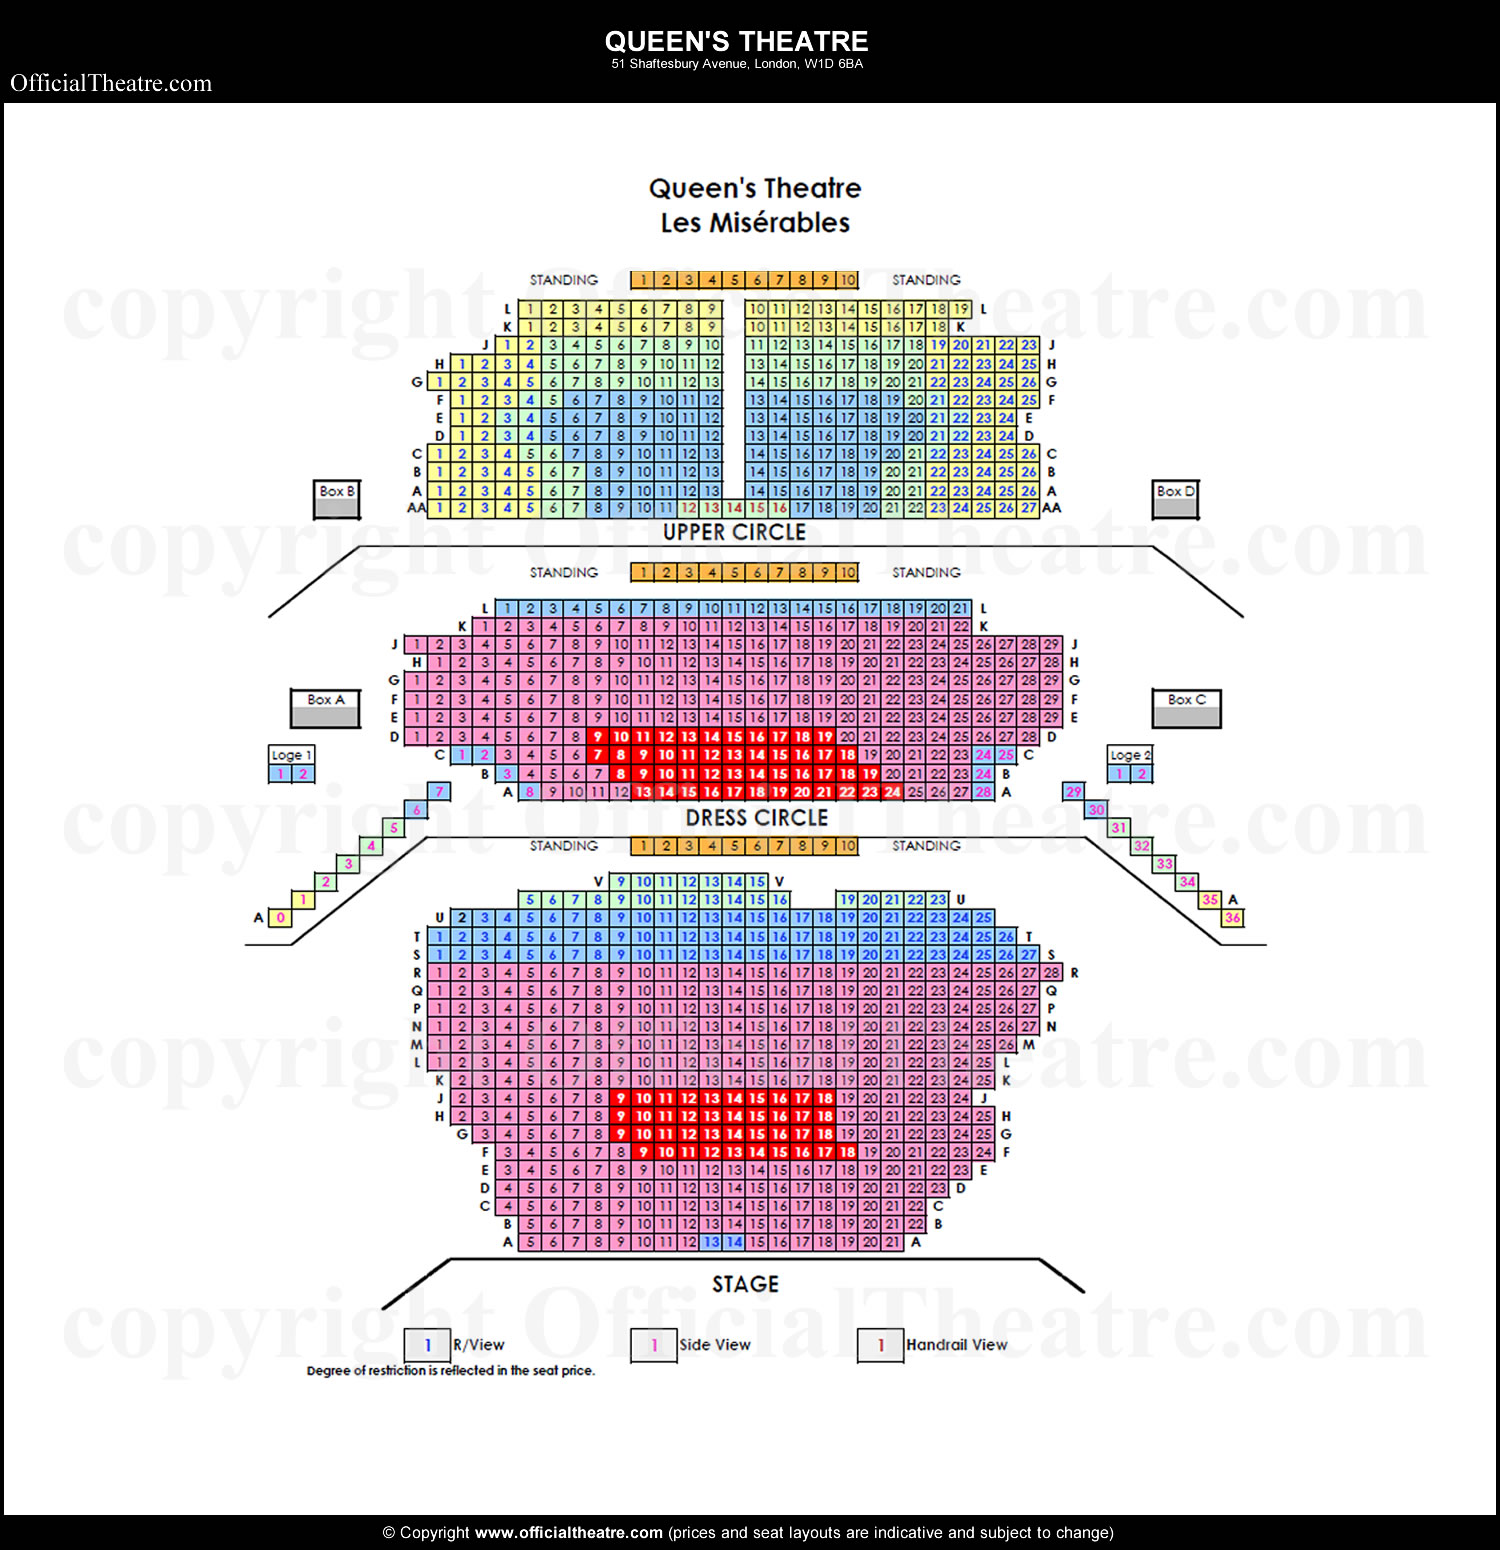 Prince of Wales Theatre Seating Plan, London | Boxoffice.co.uk